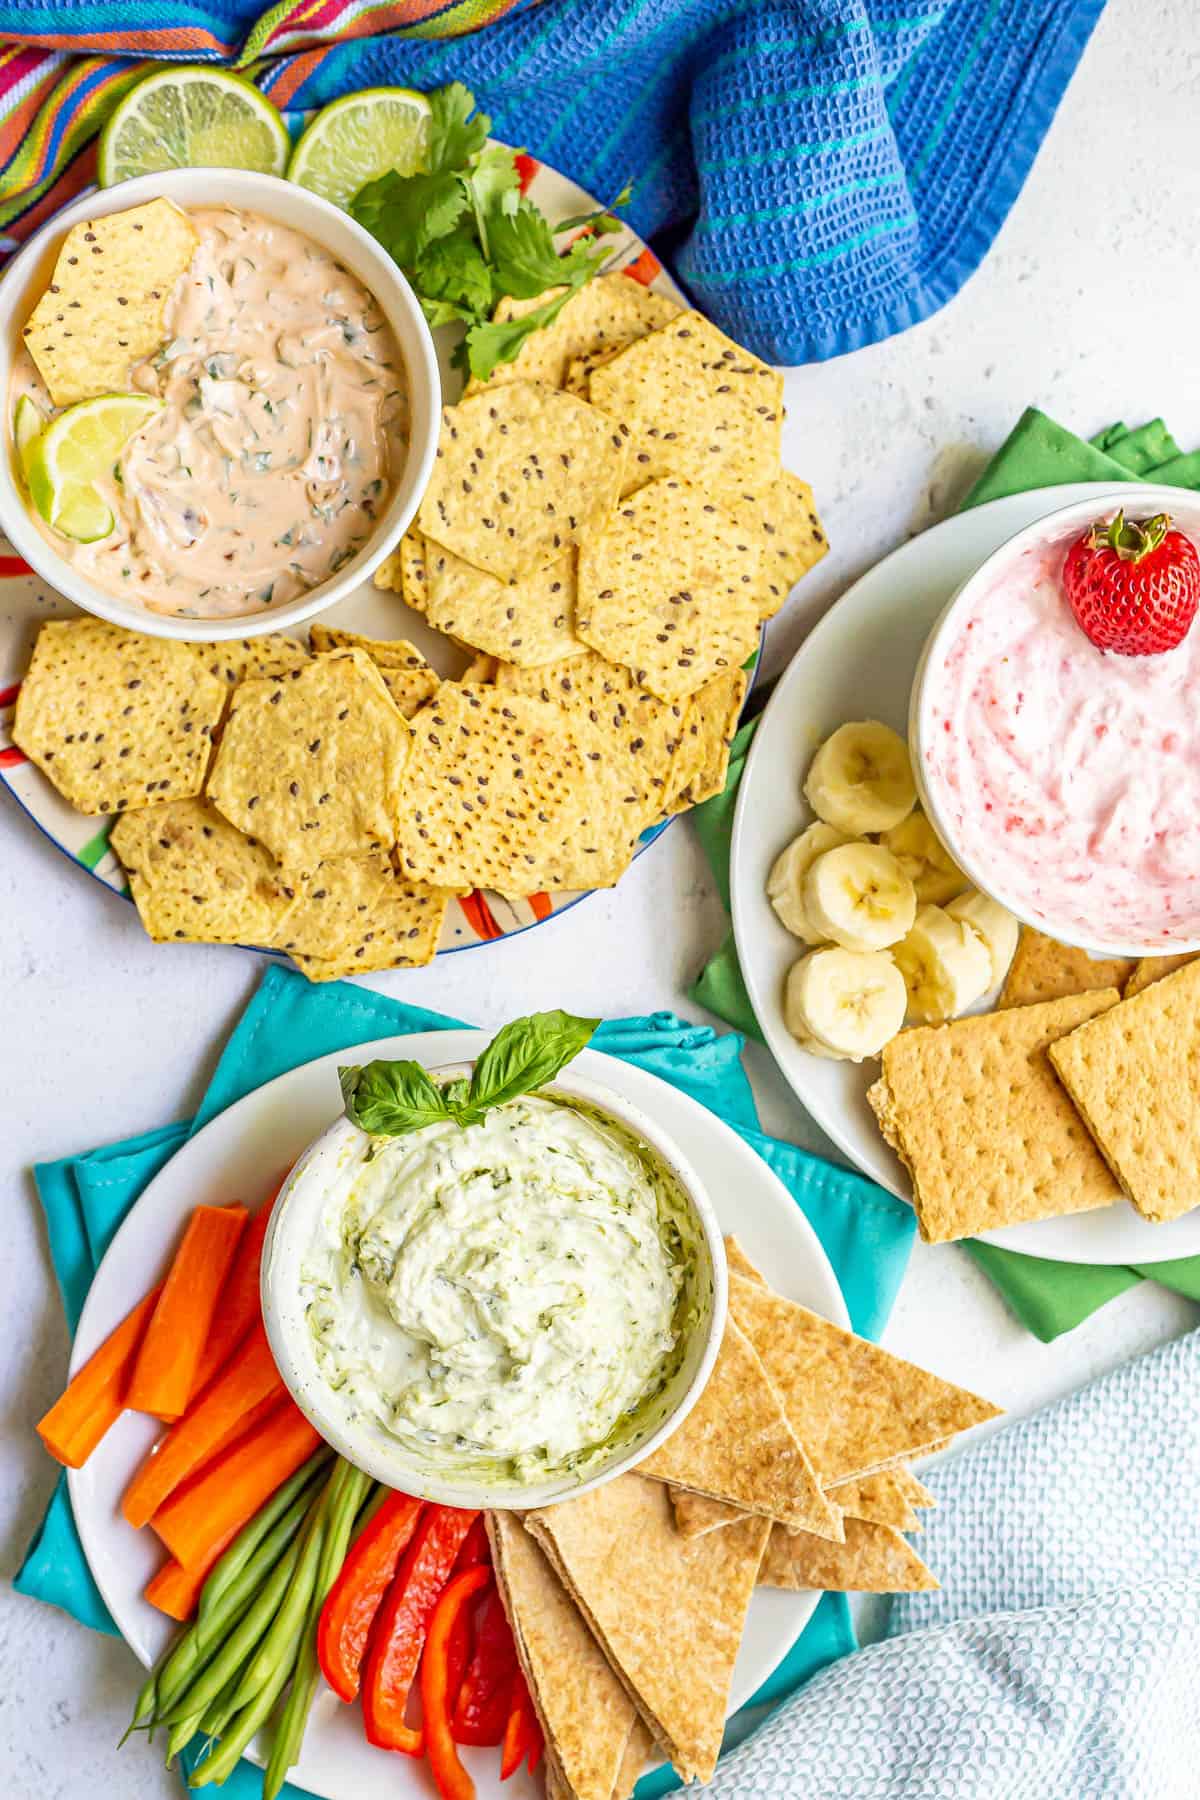 Three different Greek yogurt dips in bowls on plates with an assortment of foods for dipping.